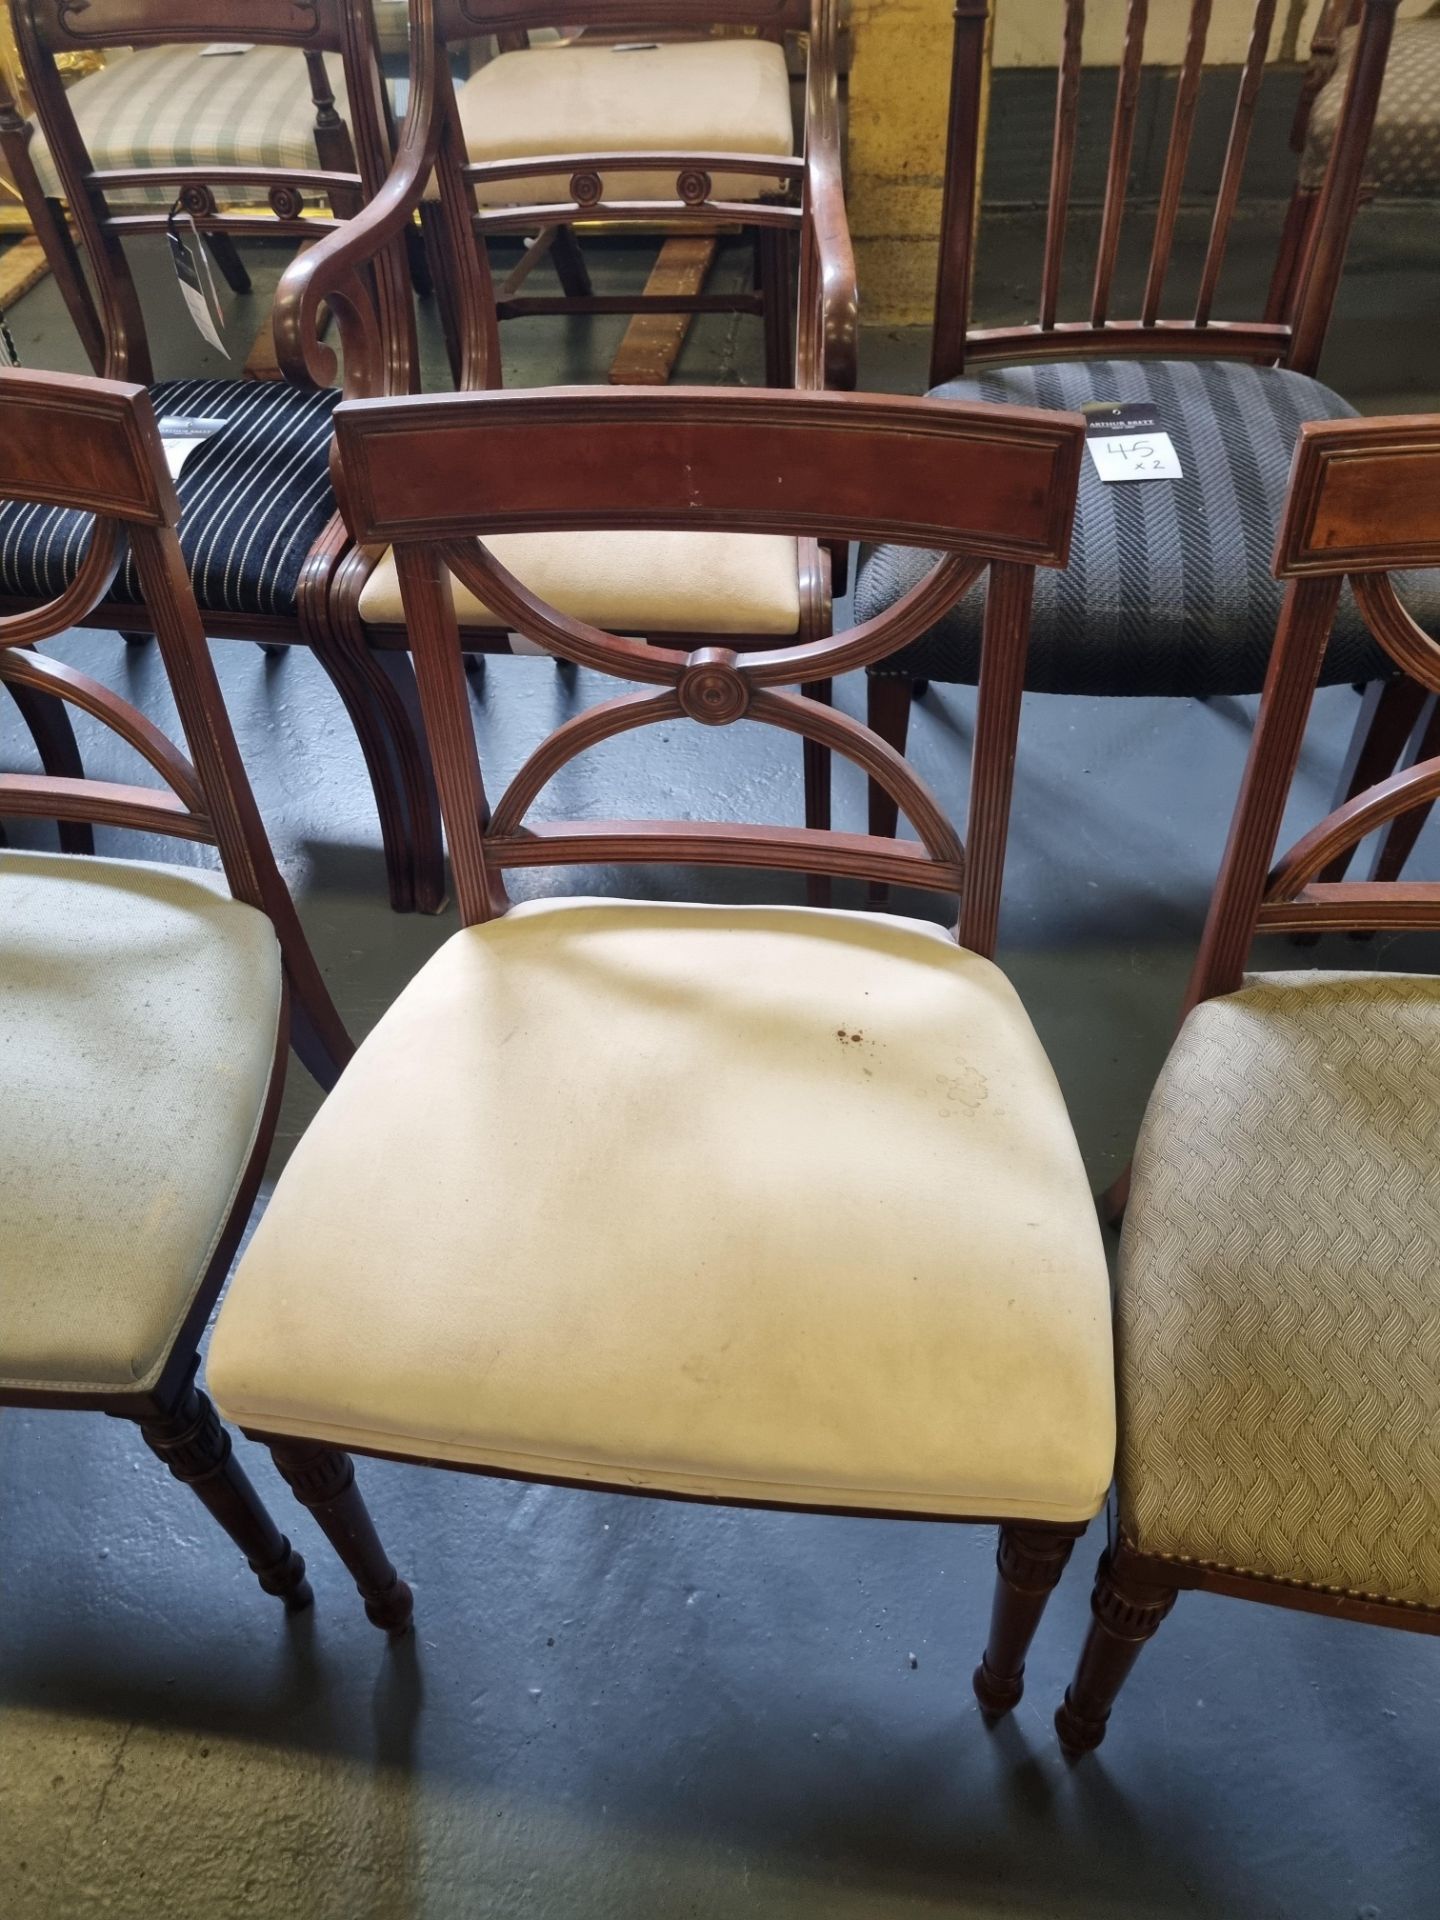 6 X Arthur Brett Sheraton-Style Mahogany Upholstered Dining Chairs Featuring A Well Figured Mahogany - Image 3 of 8